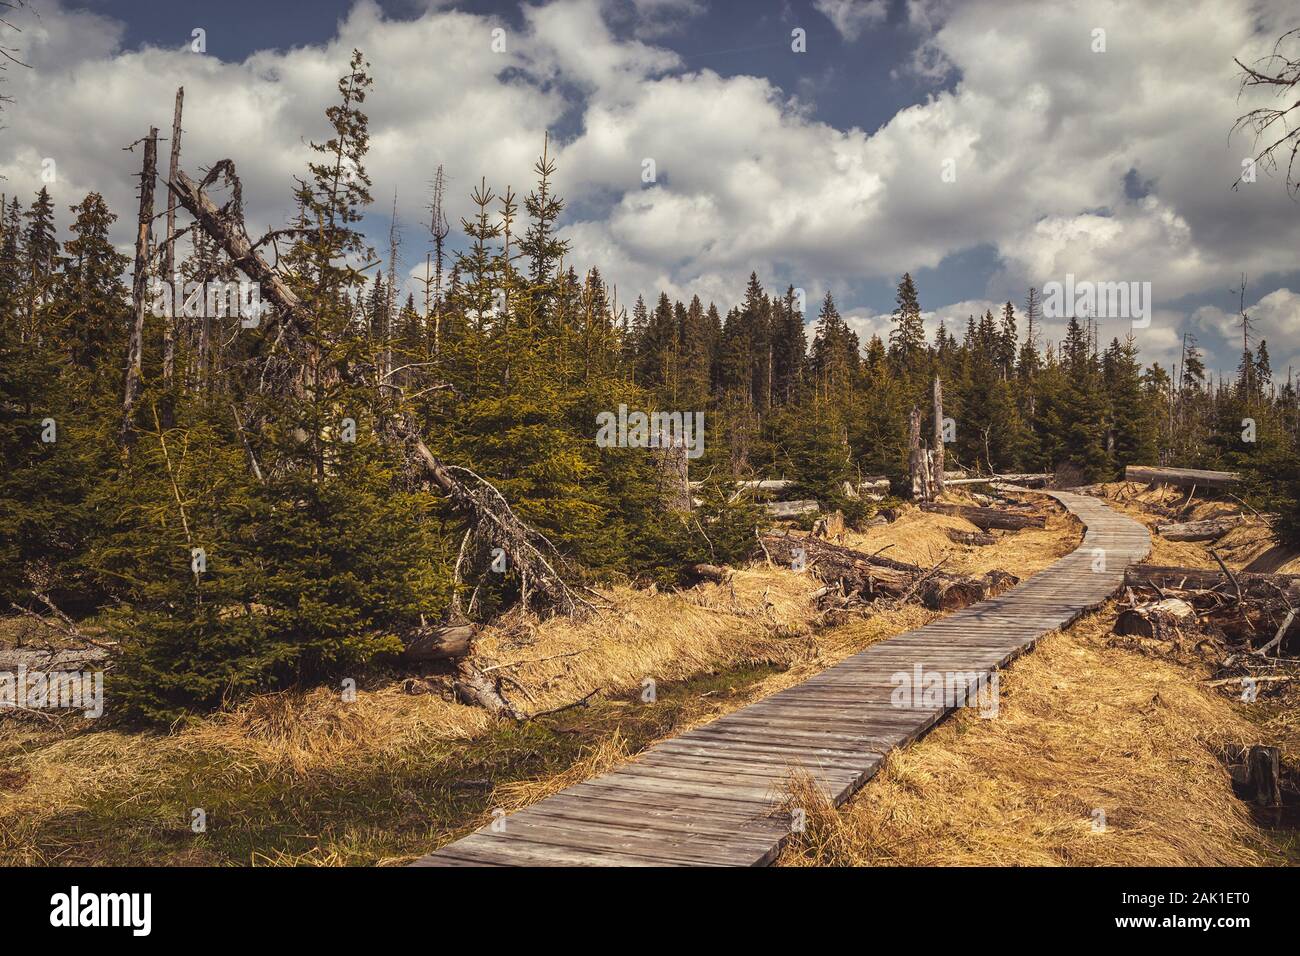 Path (wooden walkway) between trees (spruces) in the background sky with white clouds, Cikanska slat (Gypsy moor) - peat bogs in the Sumava Stock Photo